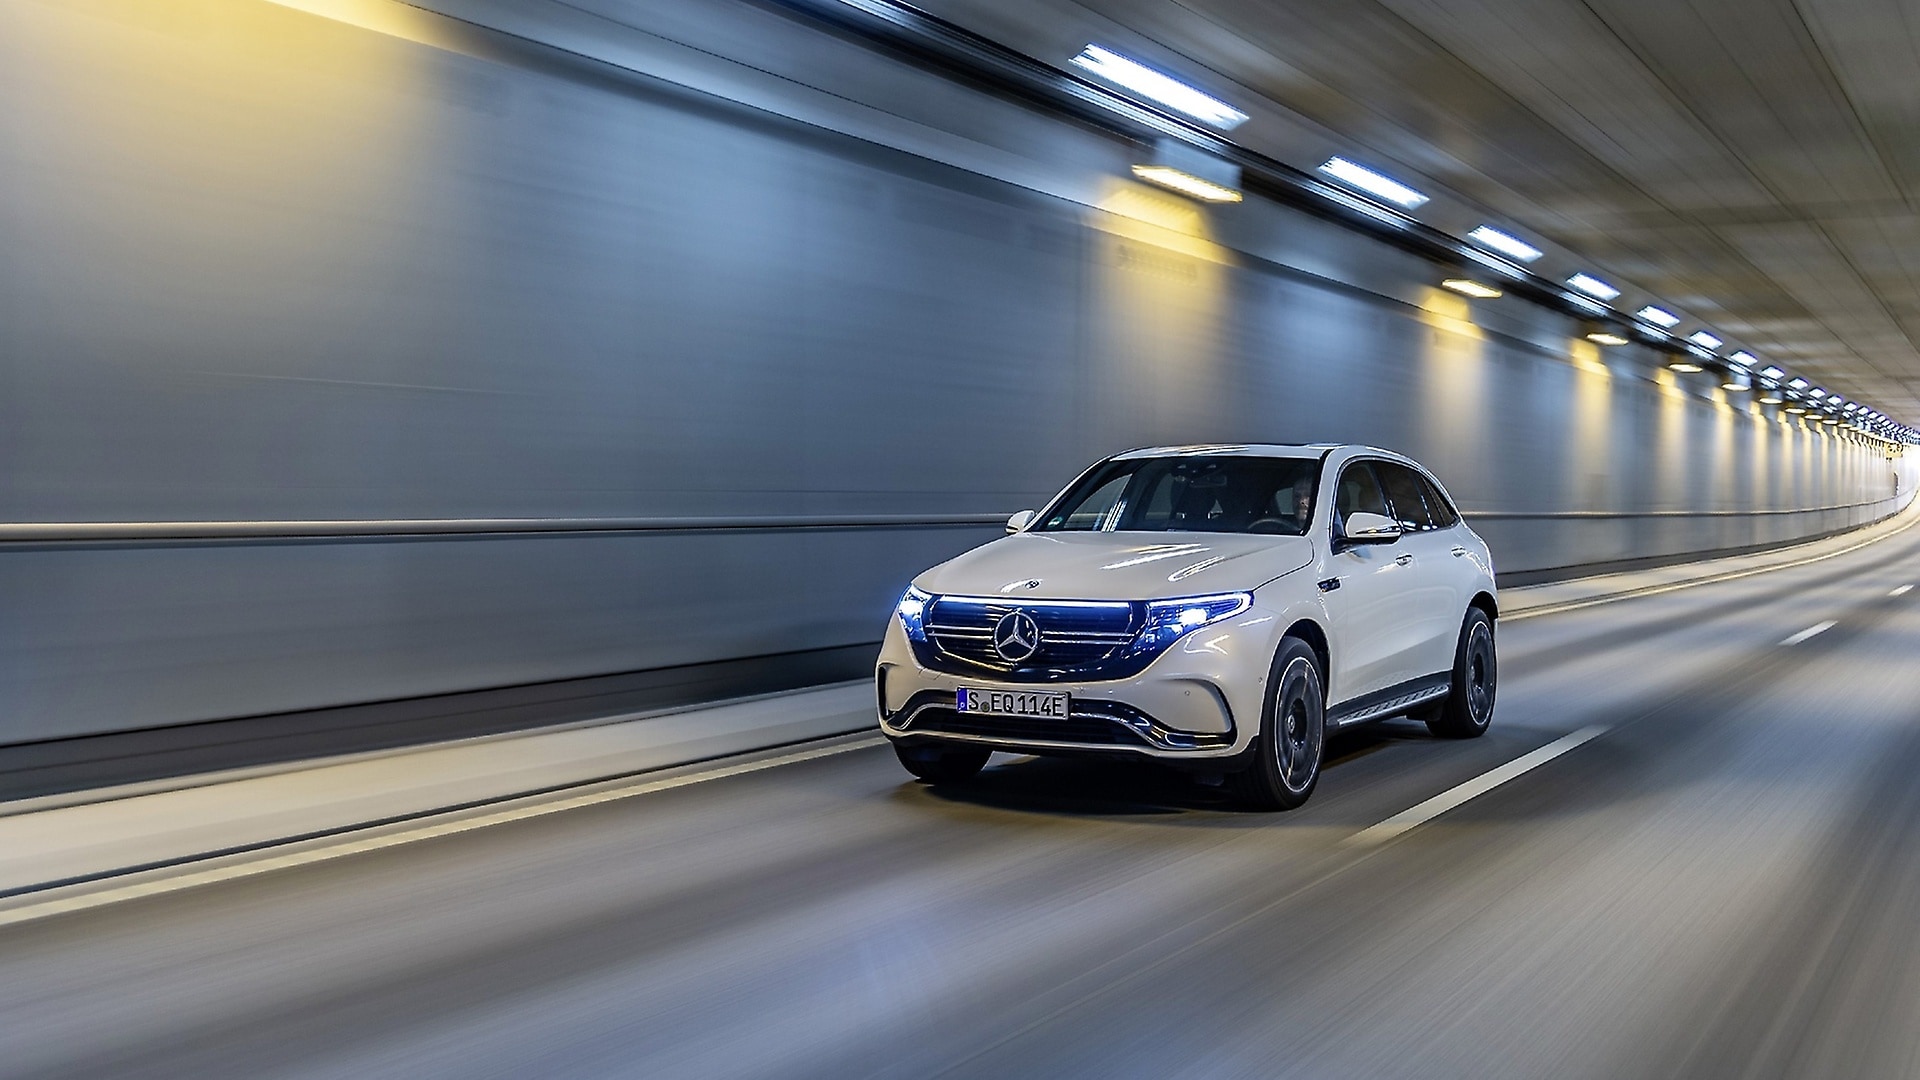 EQC 400 4MATIC (21.3 - 20.2 kWh/100 km; combined CO₂ emissions: 0 g/km)**